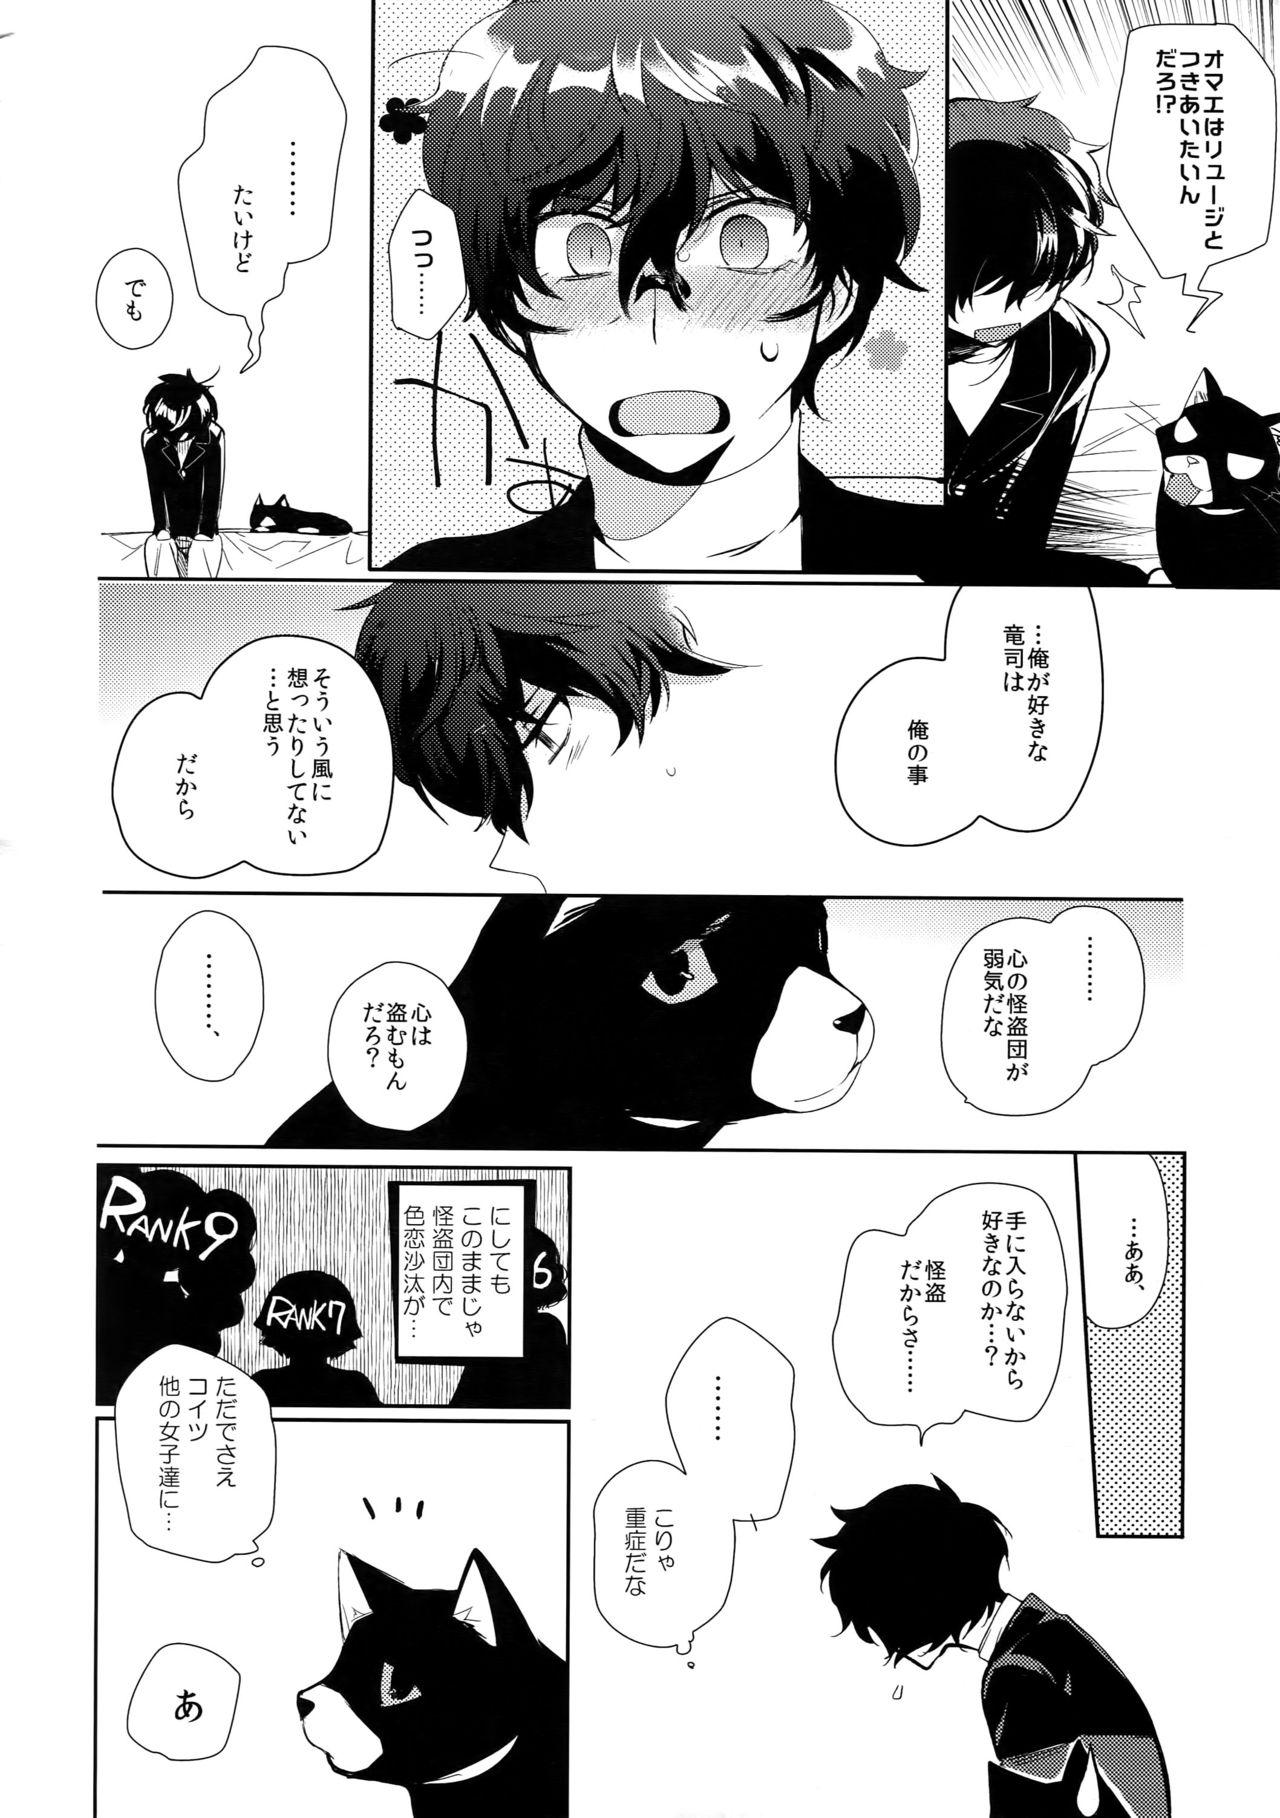 Behind You're My Hero - Persona 5 Natural - Page 7